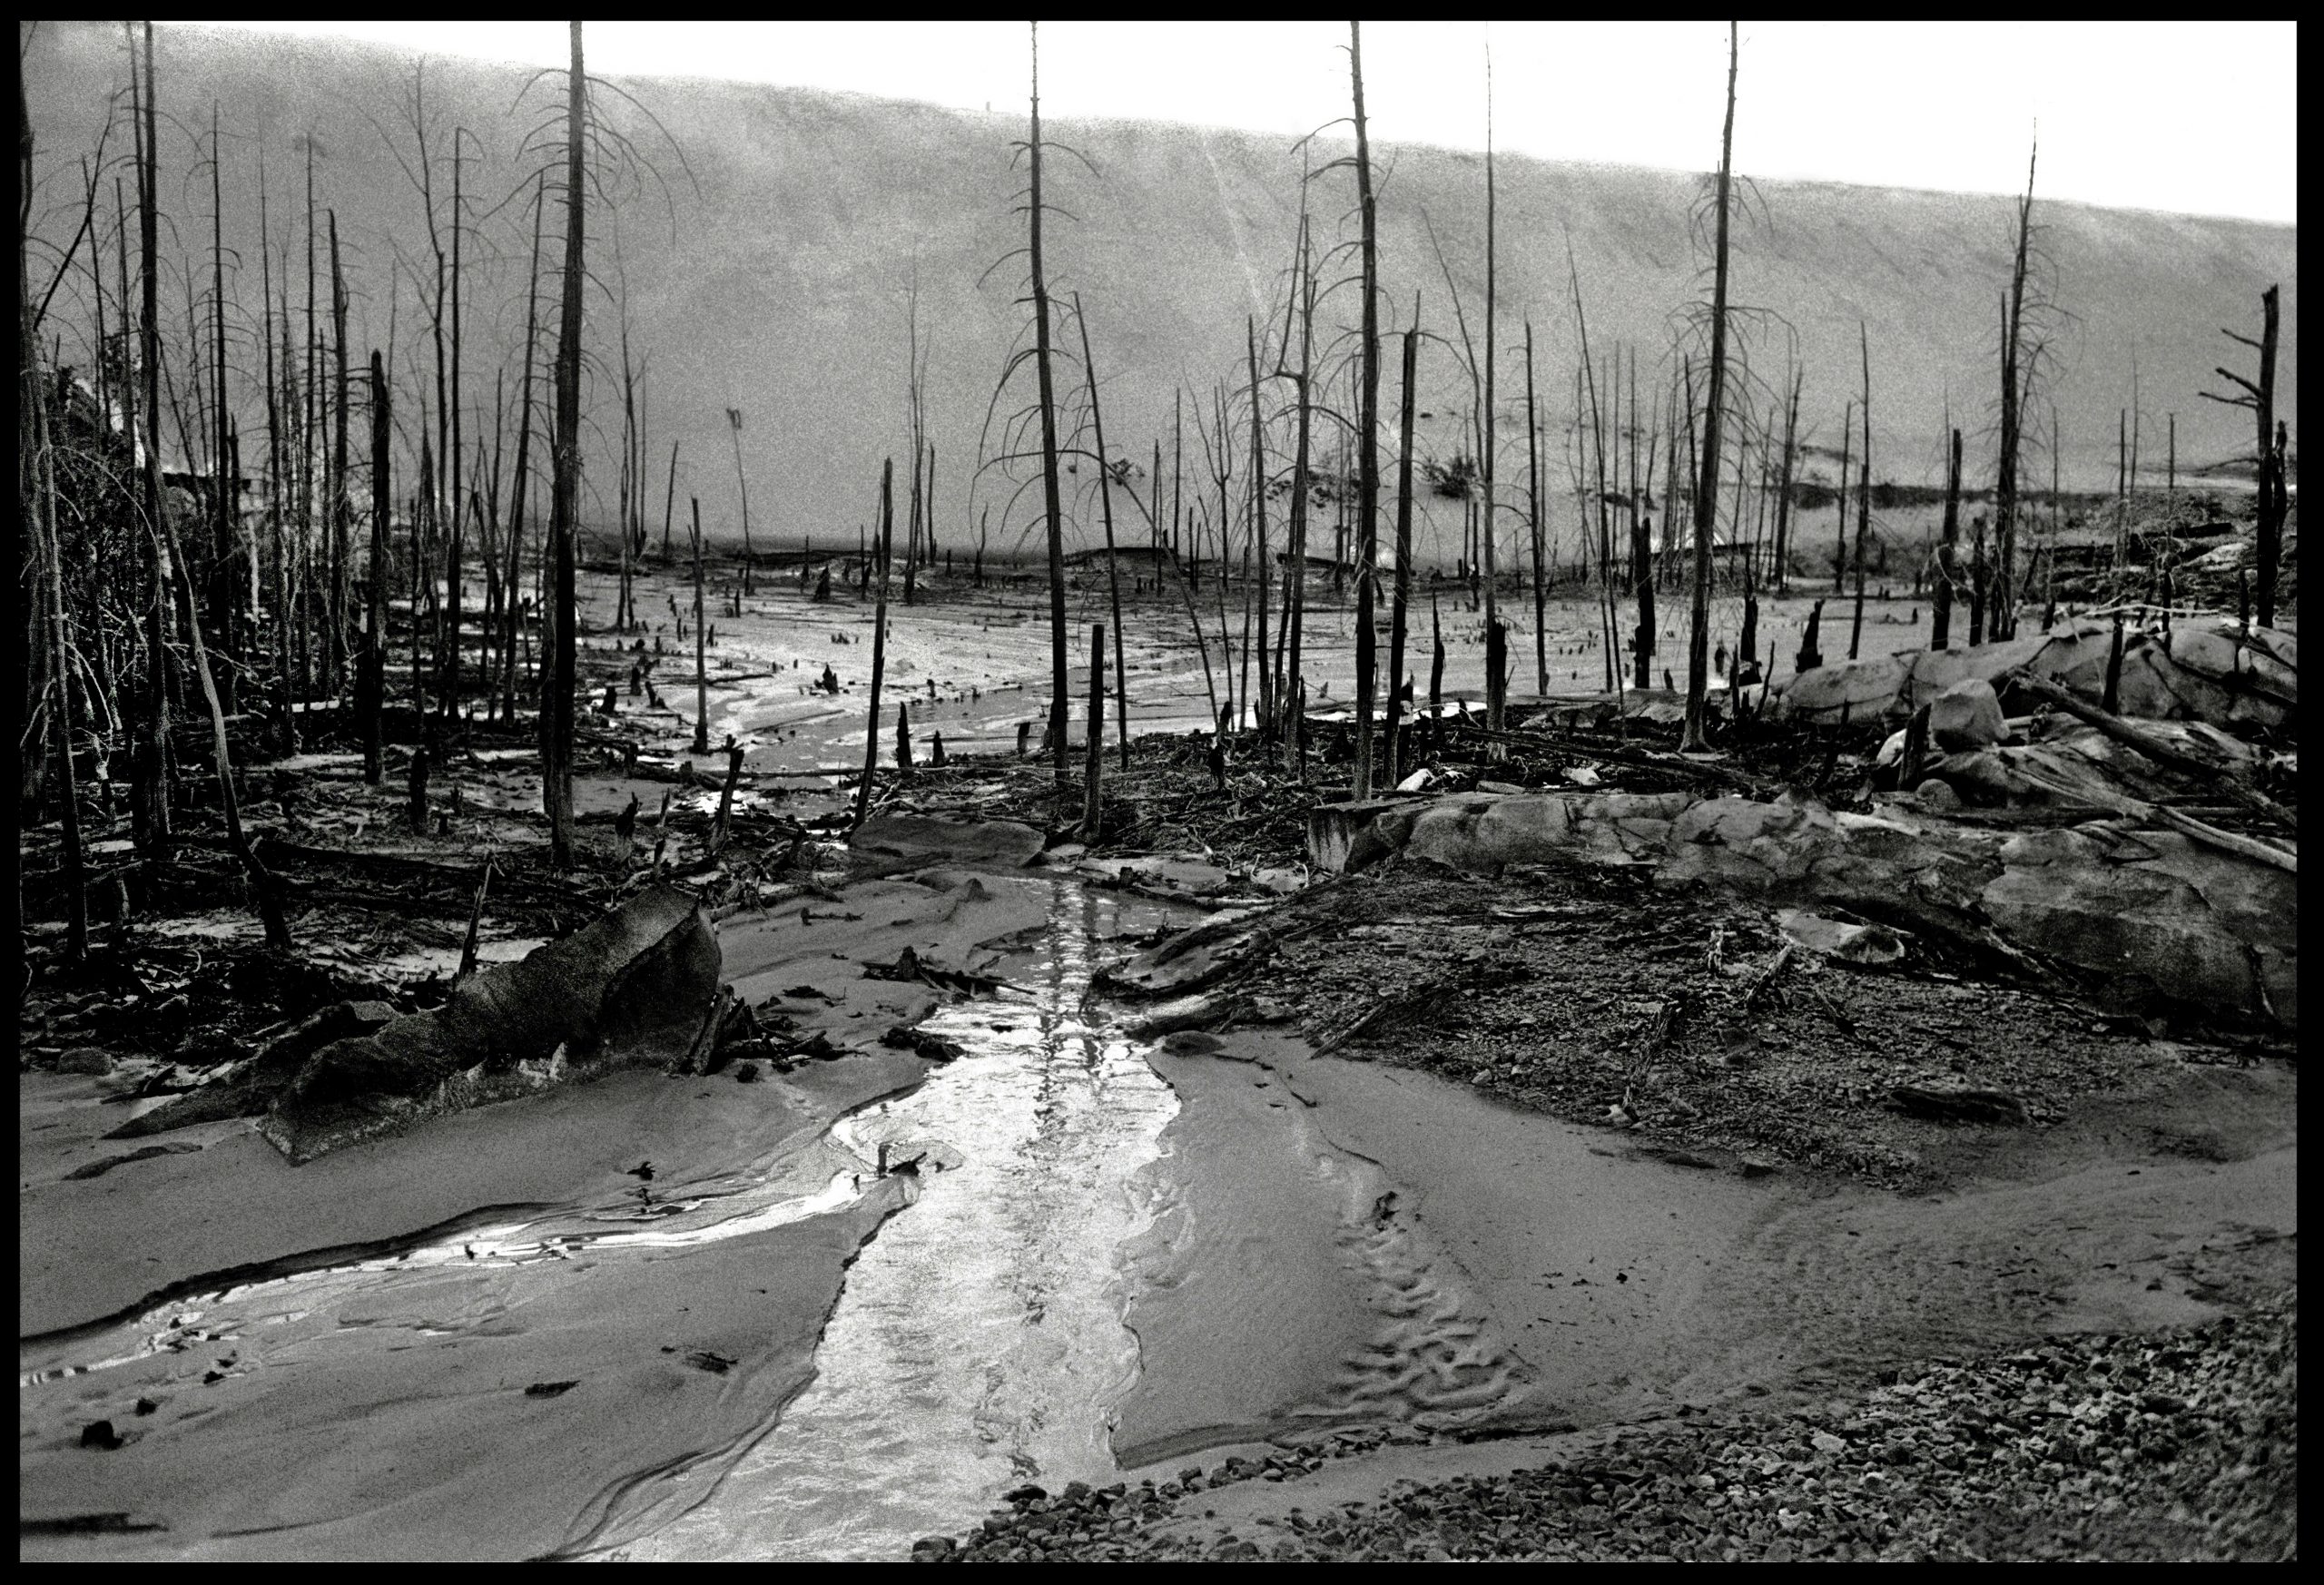 A black-and-white photograph of a flooded landscape with dead trees and thick mud beneath a manmade retaining wall constructed of uranium tailings.